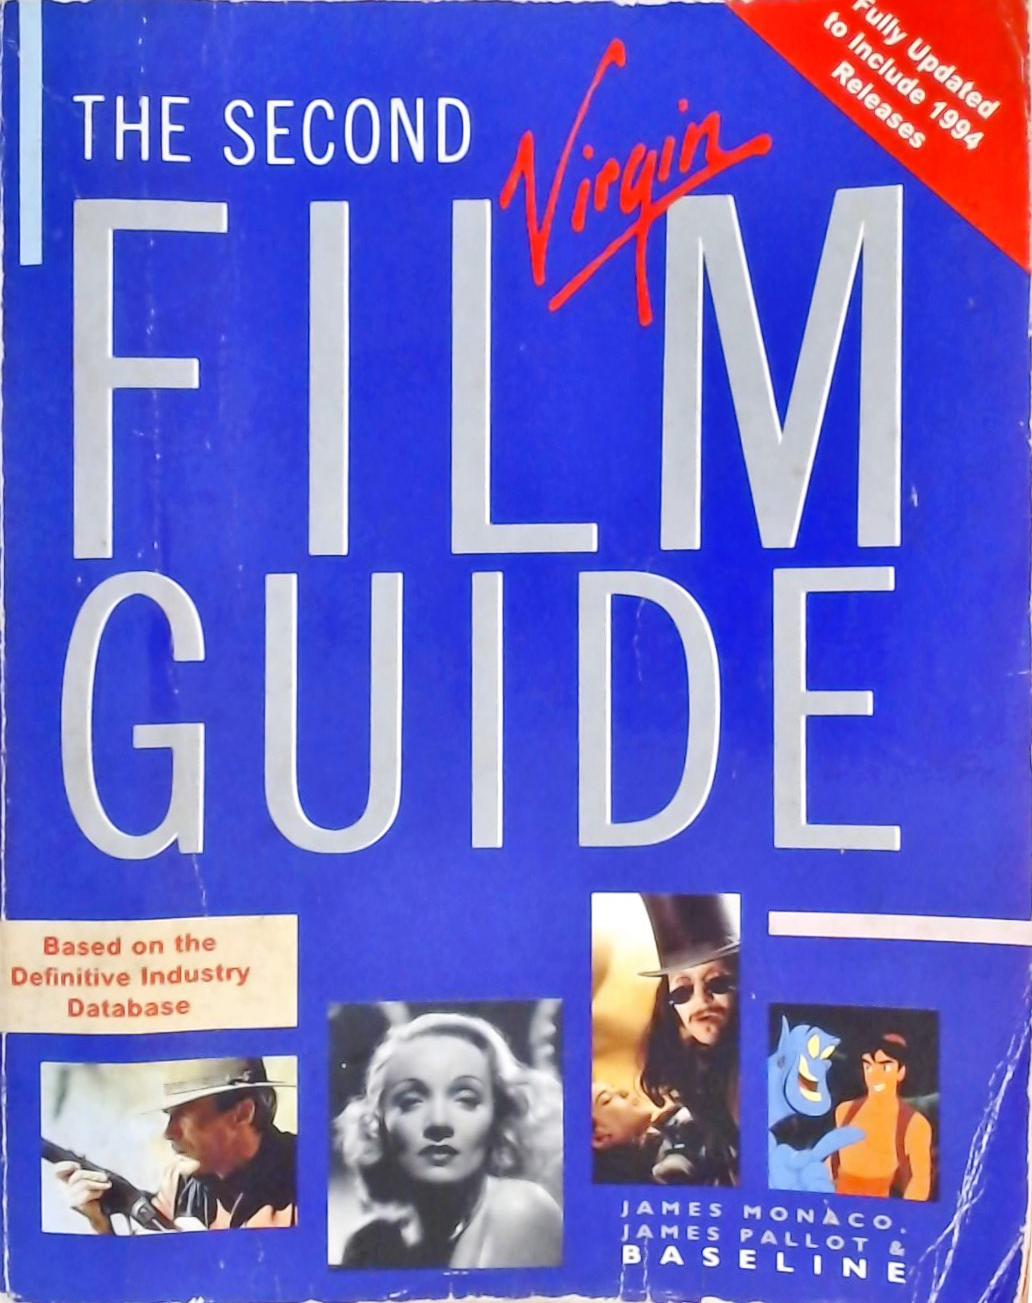 The Second Virgin Film Guide